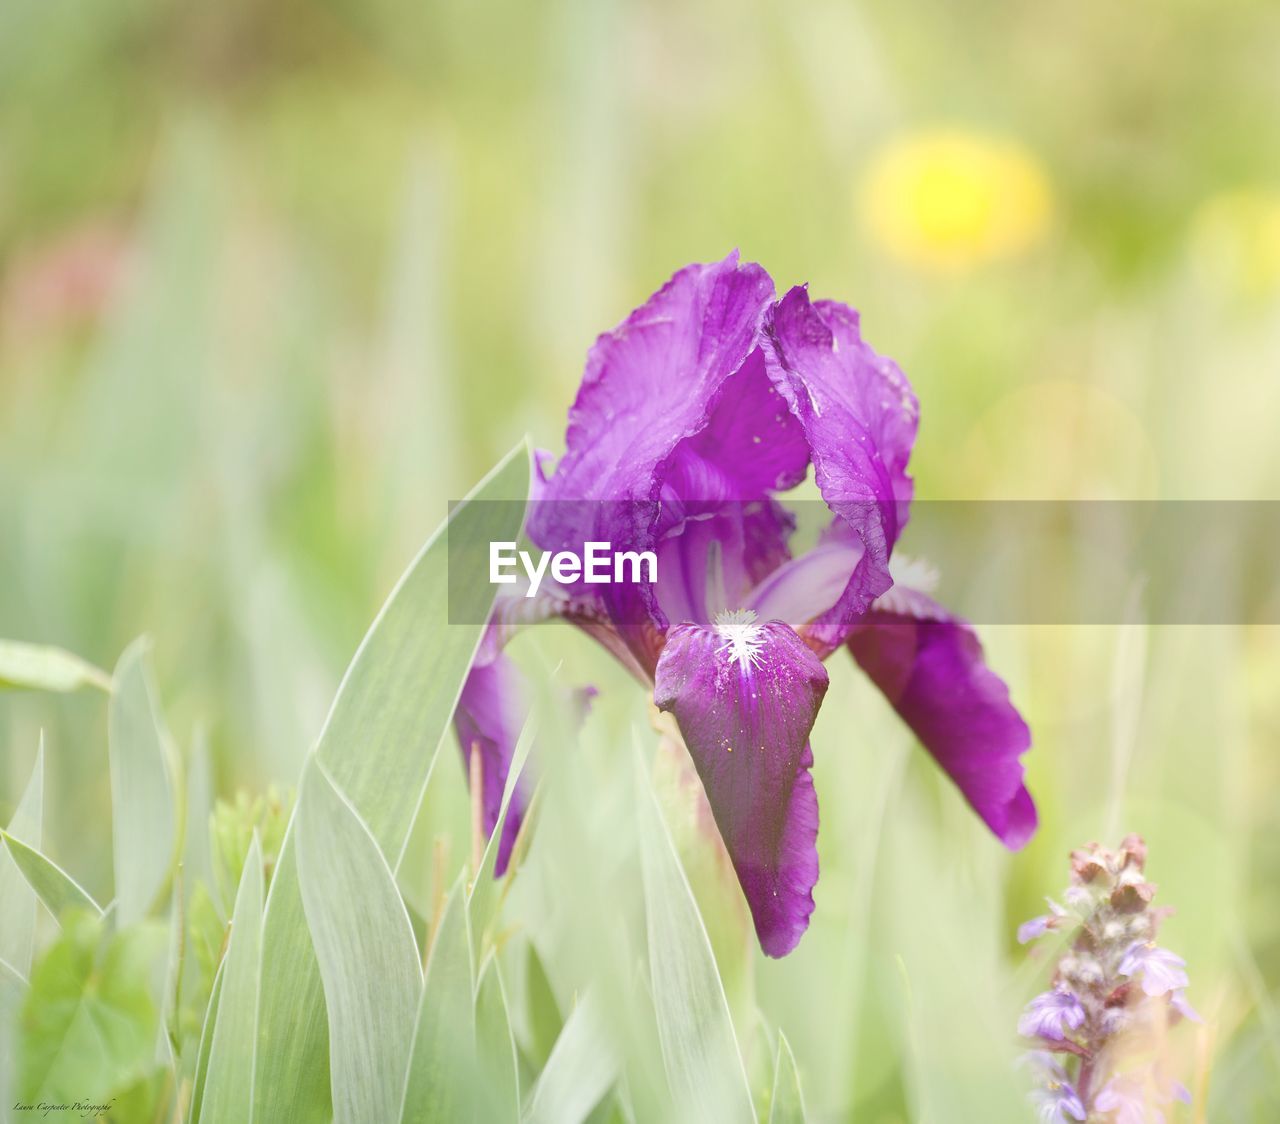 plant, flower, flowering plant, beauty in nature, freshness, purple, nature, close-up, growth, fragility, petal, iris, flower head, springtime, focus on foreground, inflorescence, human eye, selective focus, outdoors, plant part, macro photography, green, leaf, blossom, field, summer, sunlight, day, land, pink, botany, environment